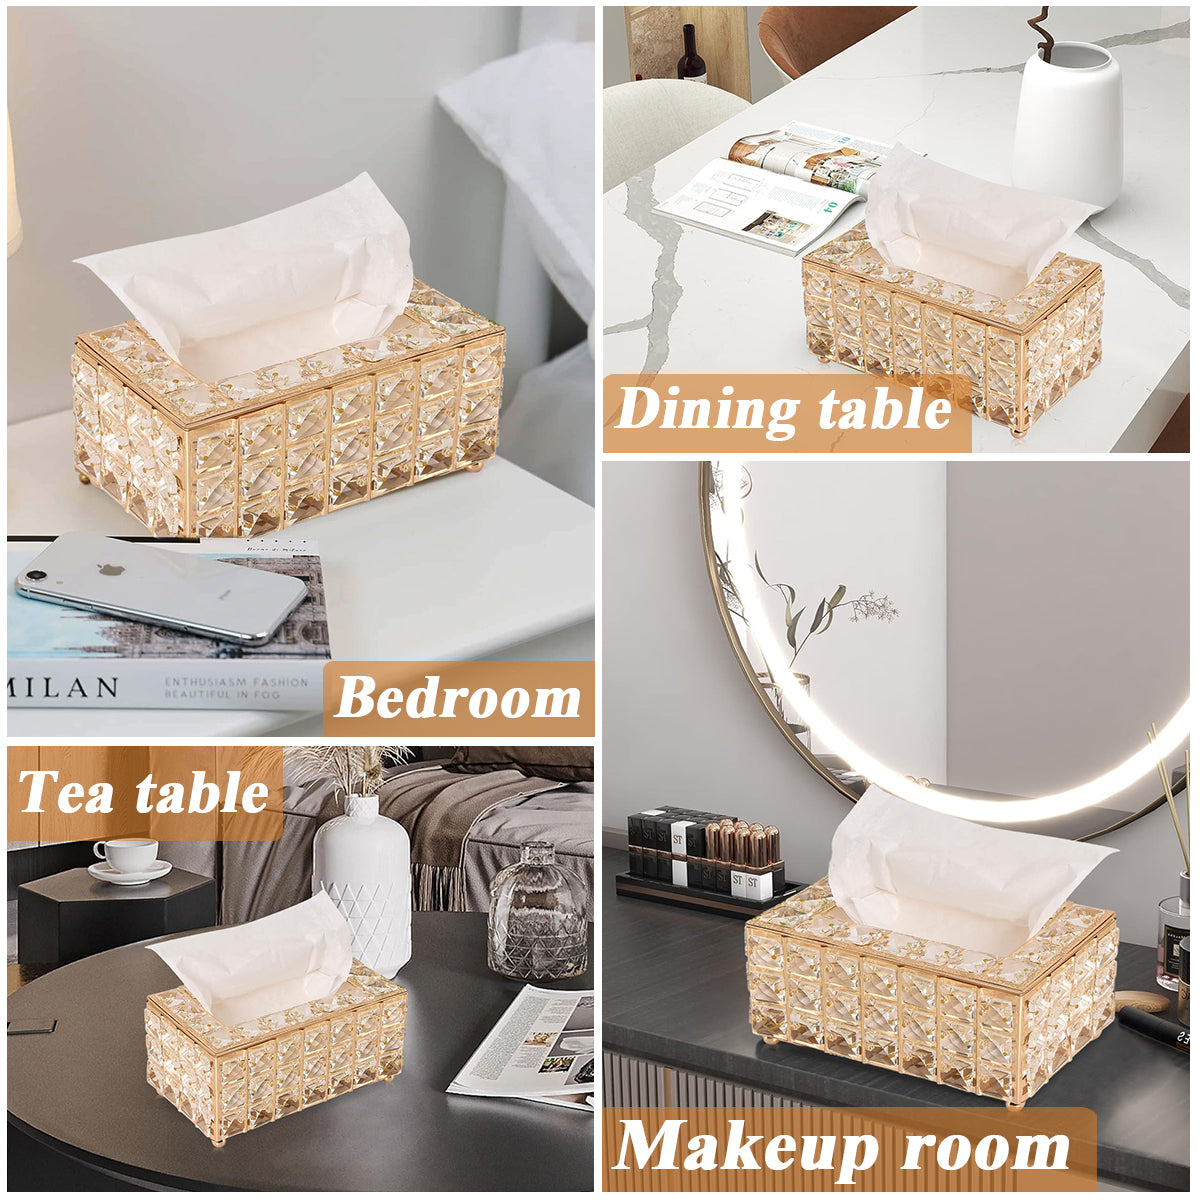 HASTHIP® Tissue Box Holder with Crystal Glass Beads, Paper Napkin Holder for Car, Crystal Napkin Holder Facial Tissue Holder Tissue Box Holder for Bathroom Kitchen Dining Room, 7.4x4.3x3.9 Inches